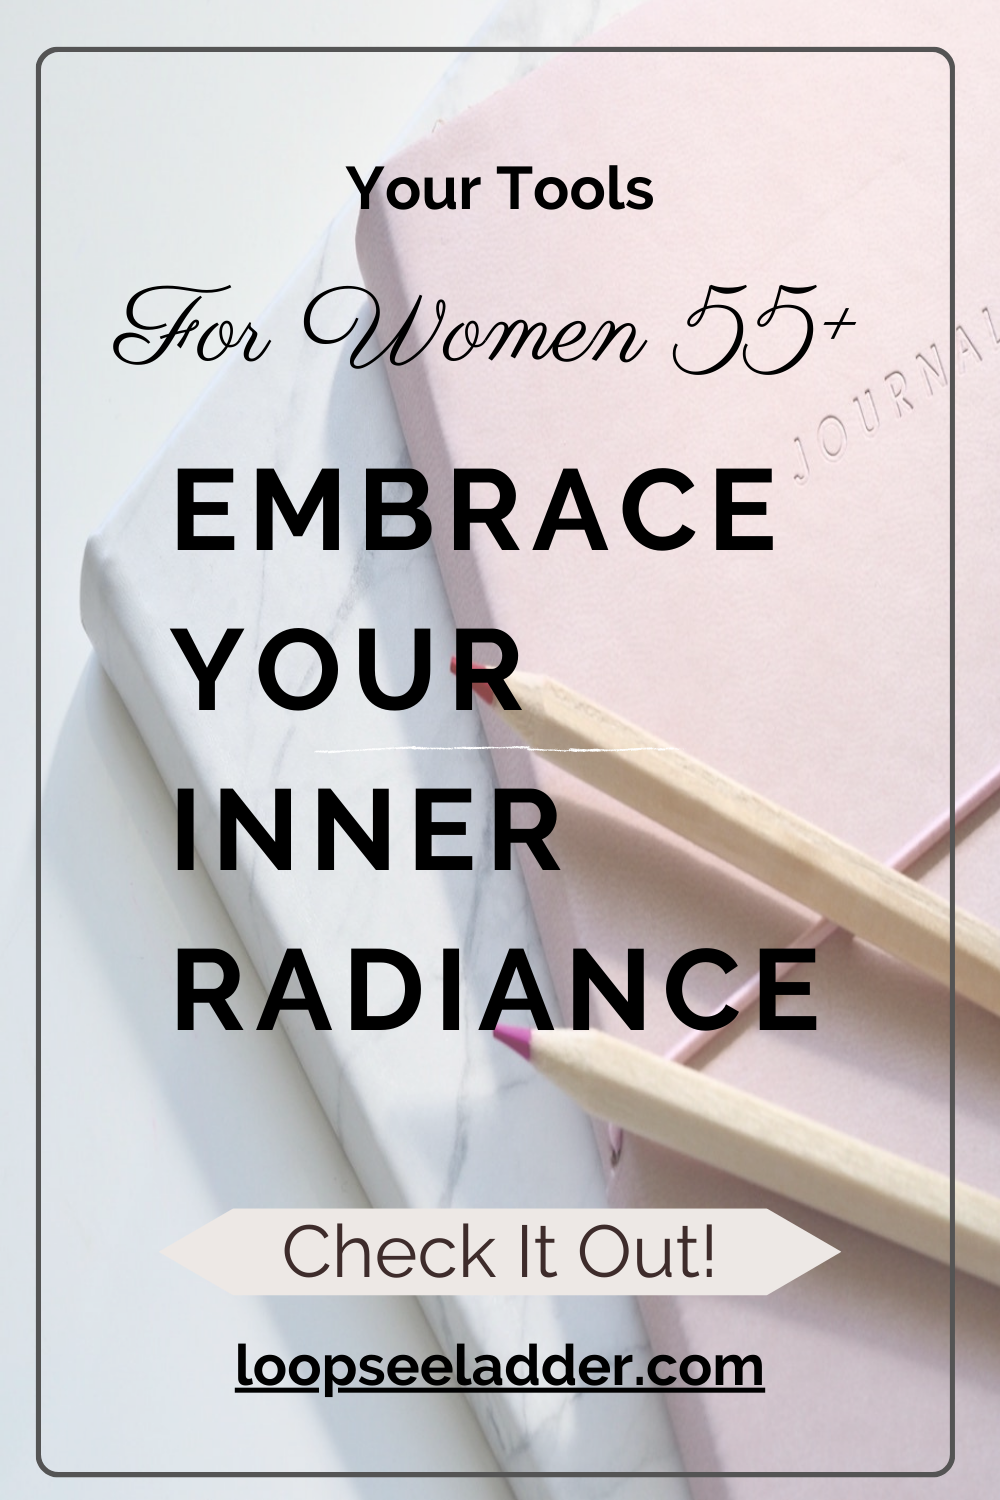 Embracing Your Inner Radiance: A Guide for Women 55+